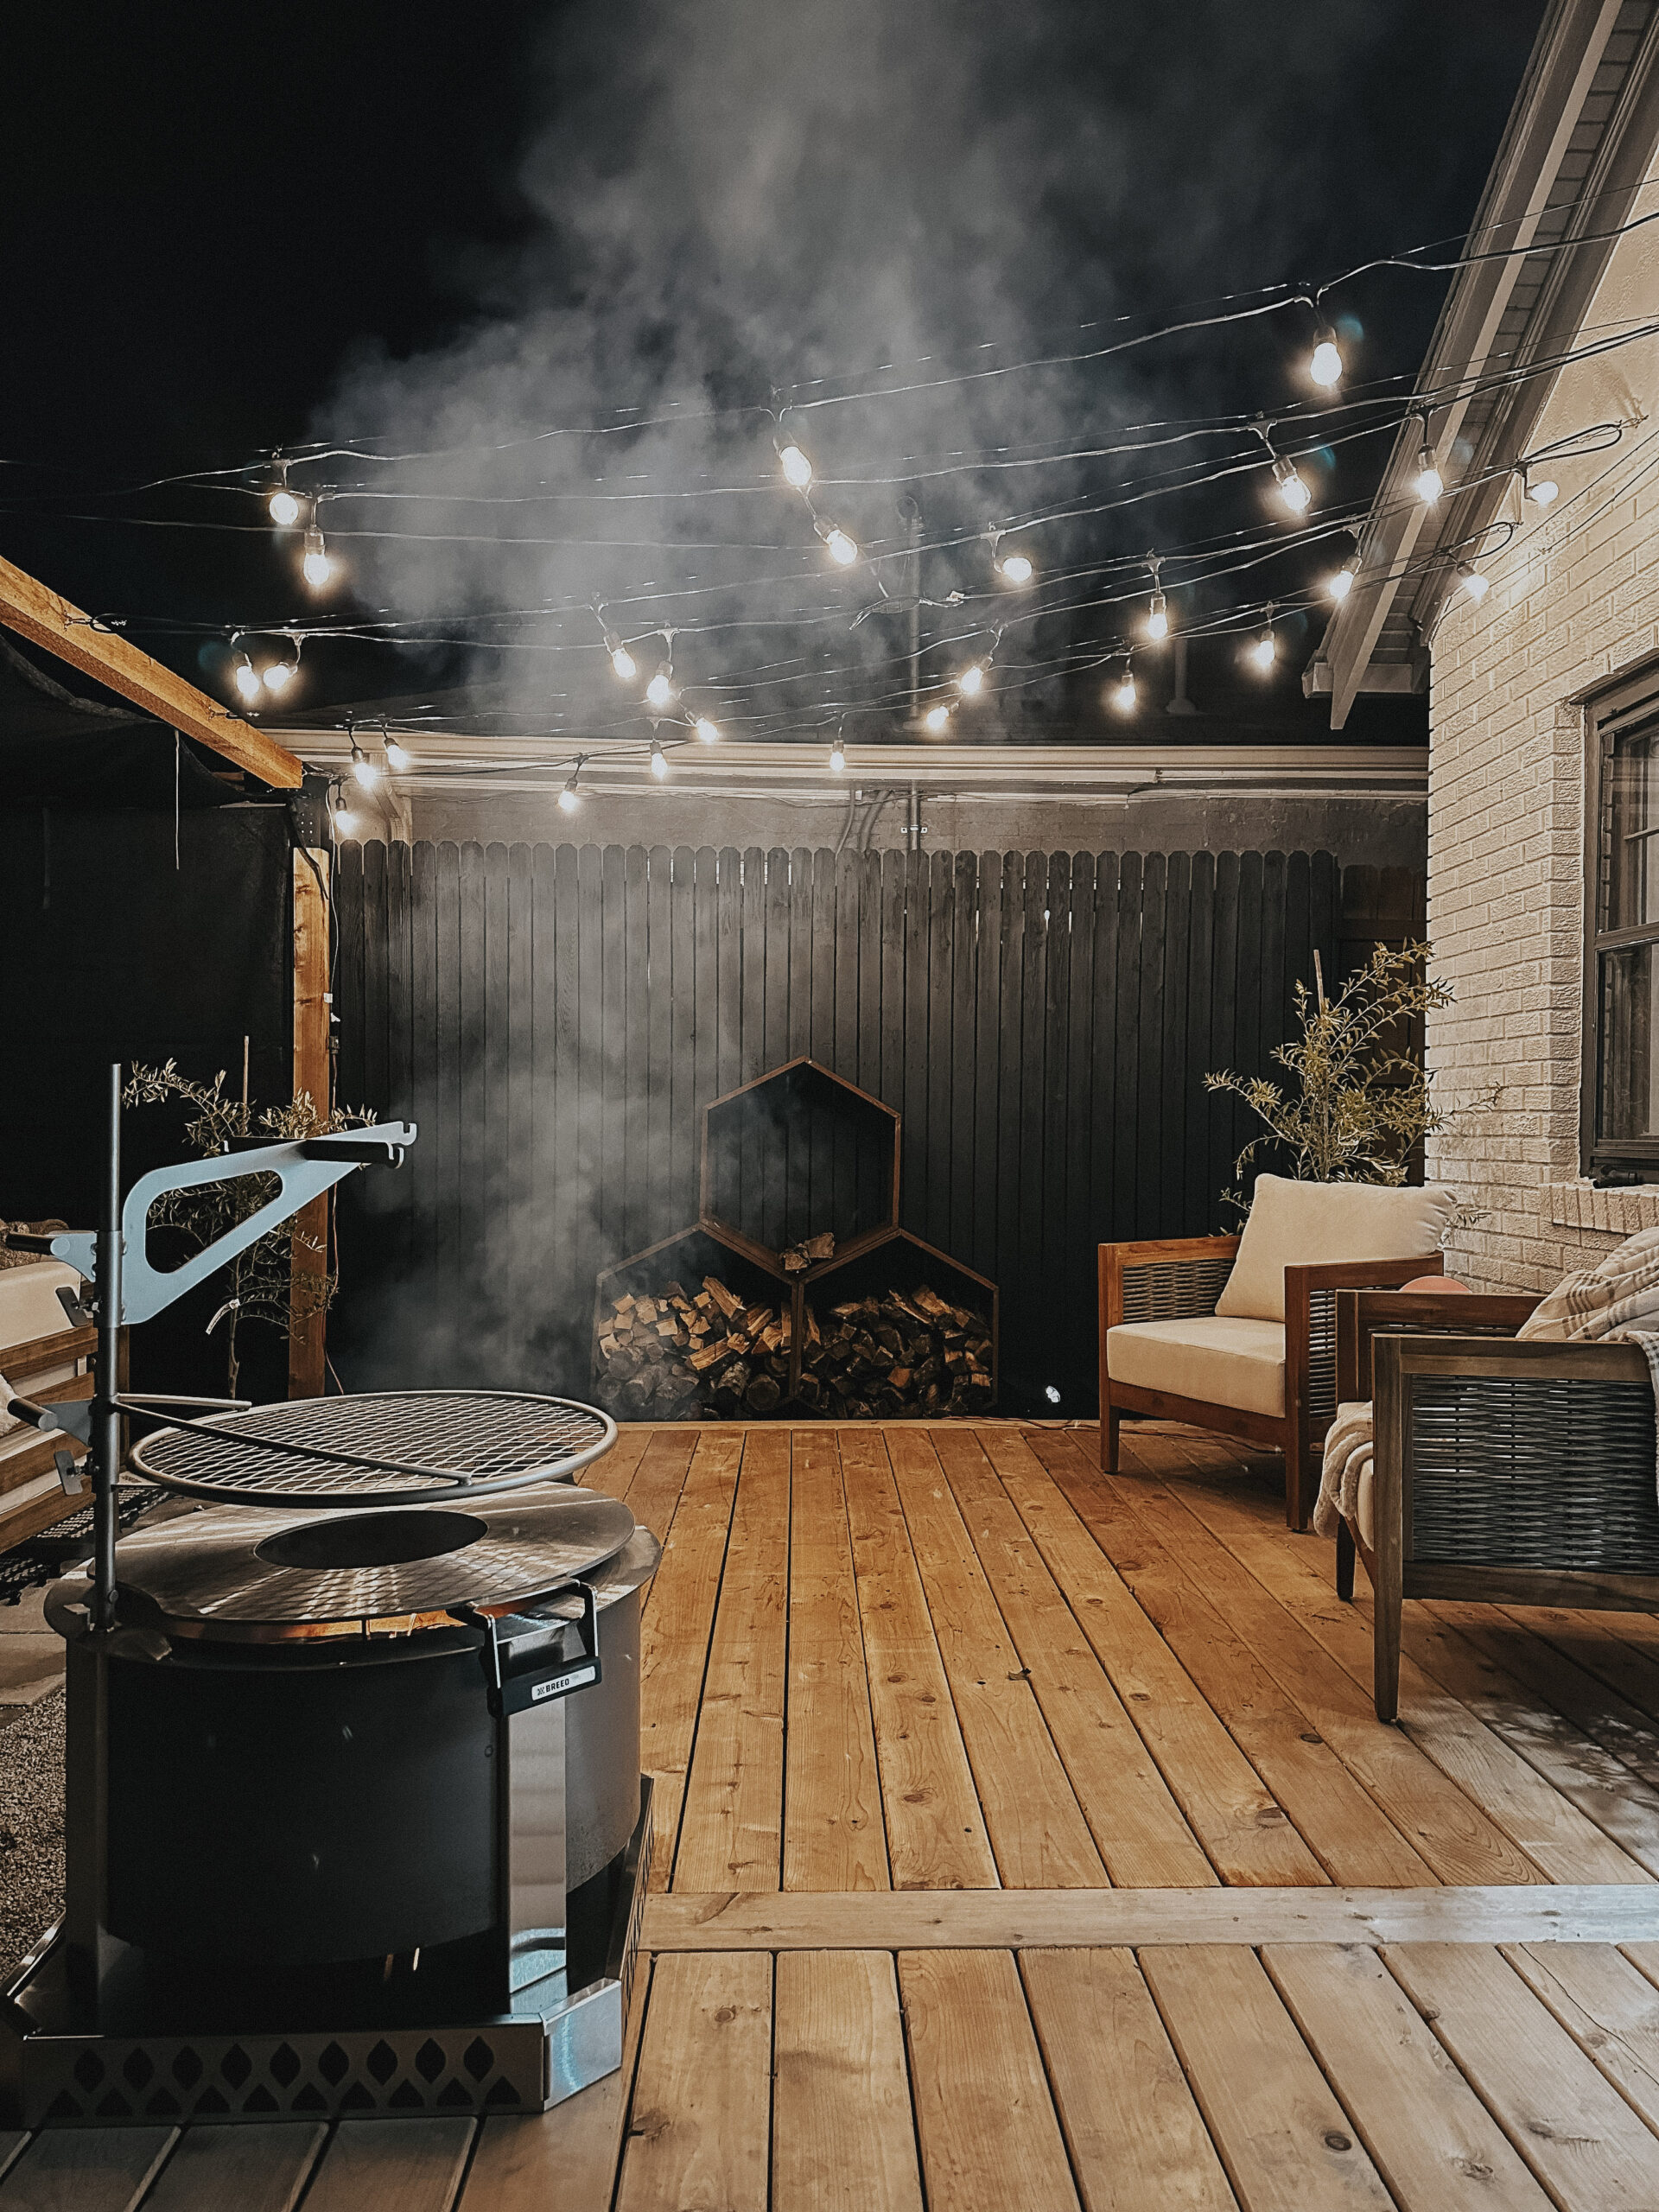 Our Outdoor Living Sources: A nighttime scene of outdoor deck and living space, with lights strung overhead, and the firepit smoking.